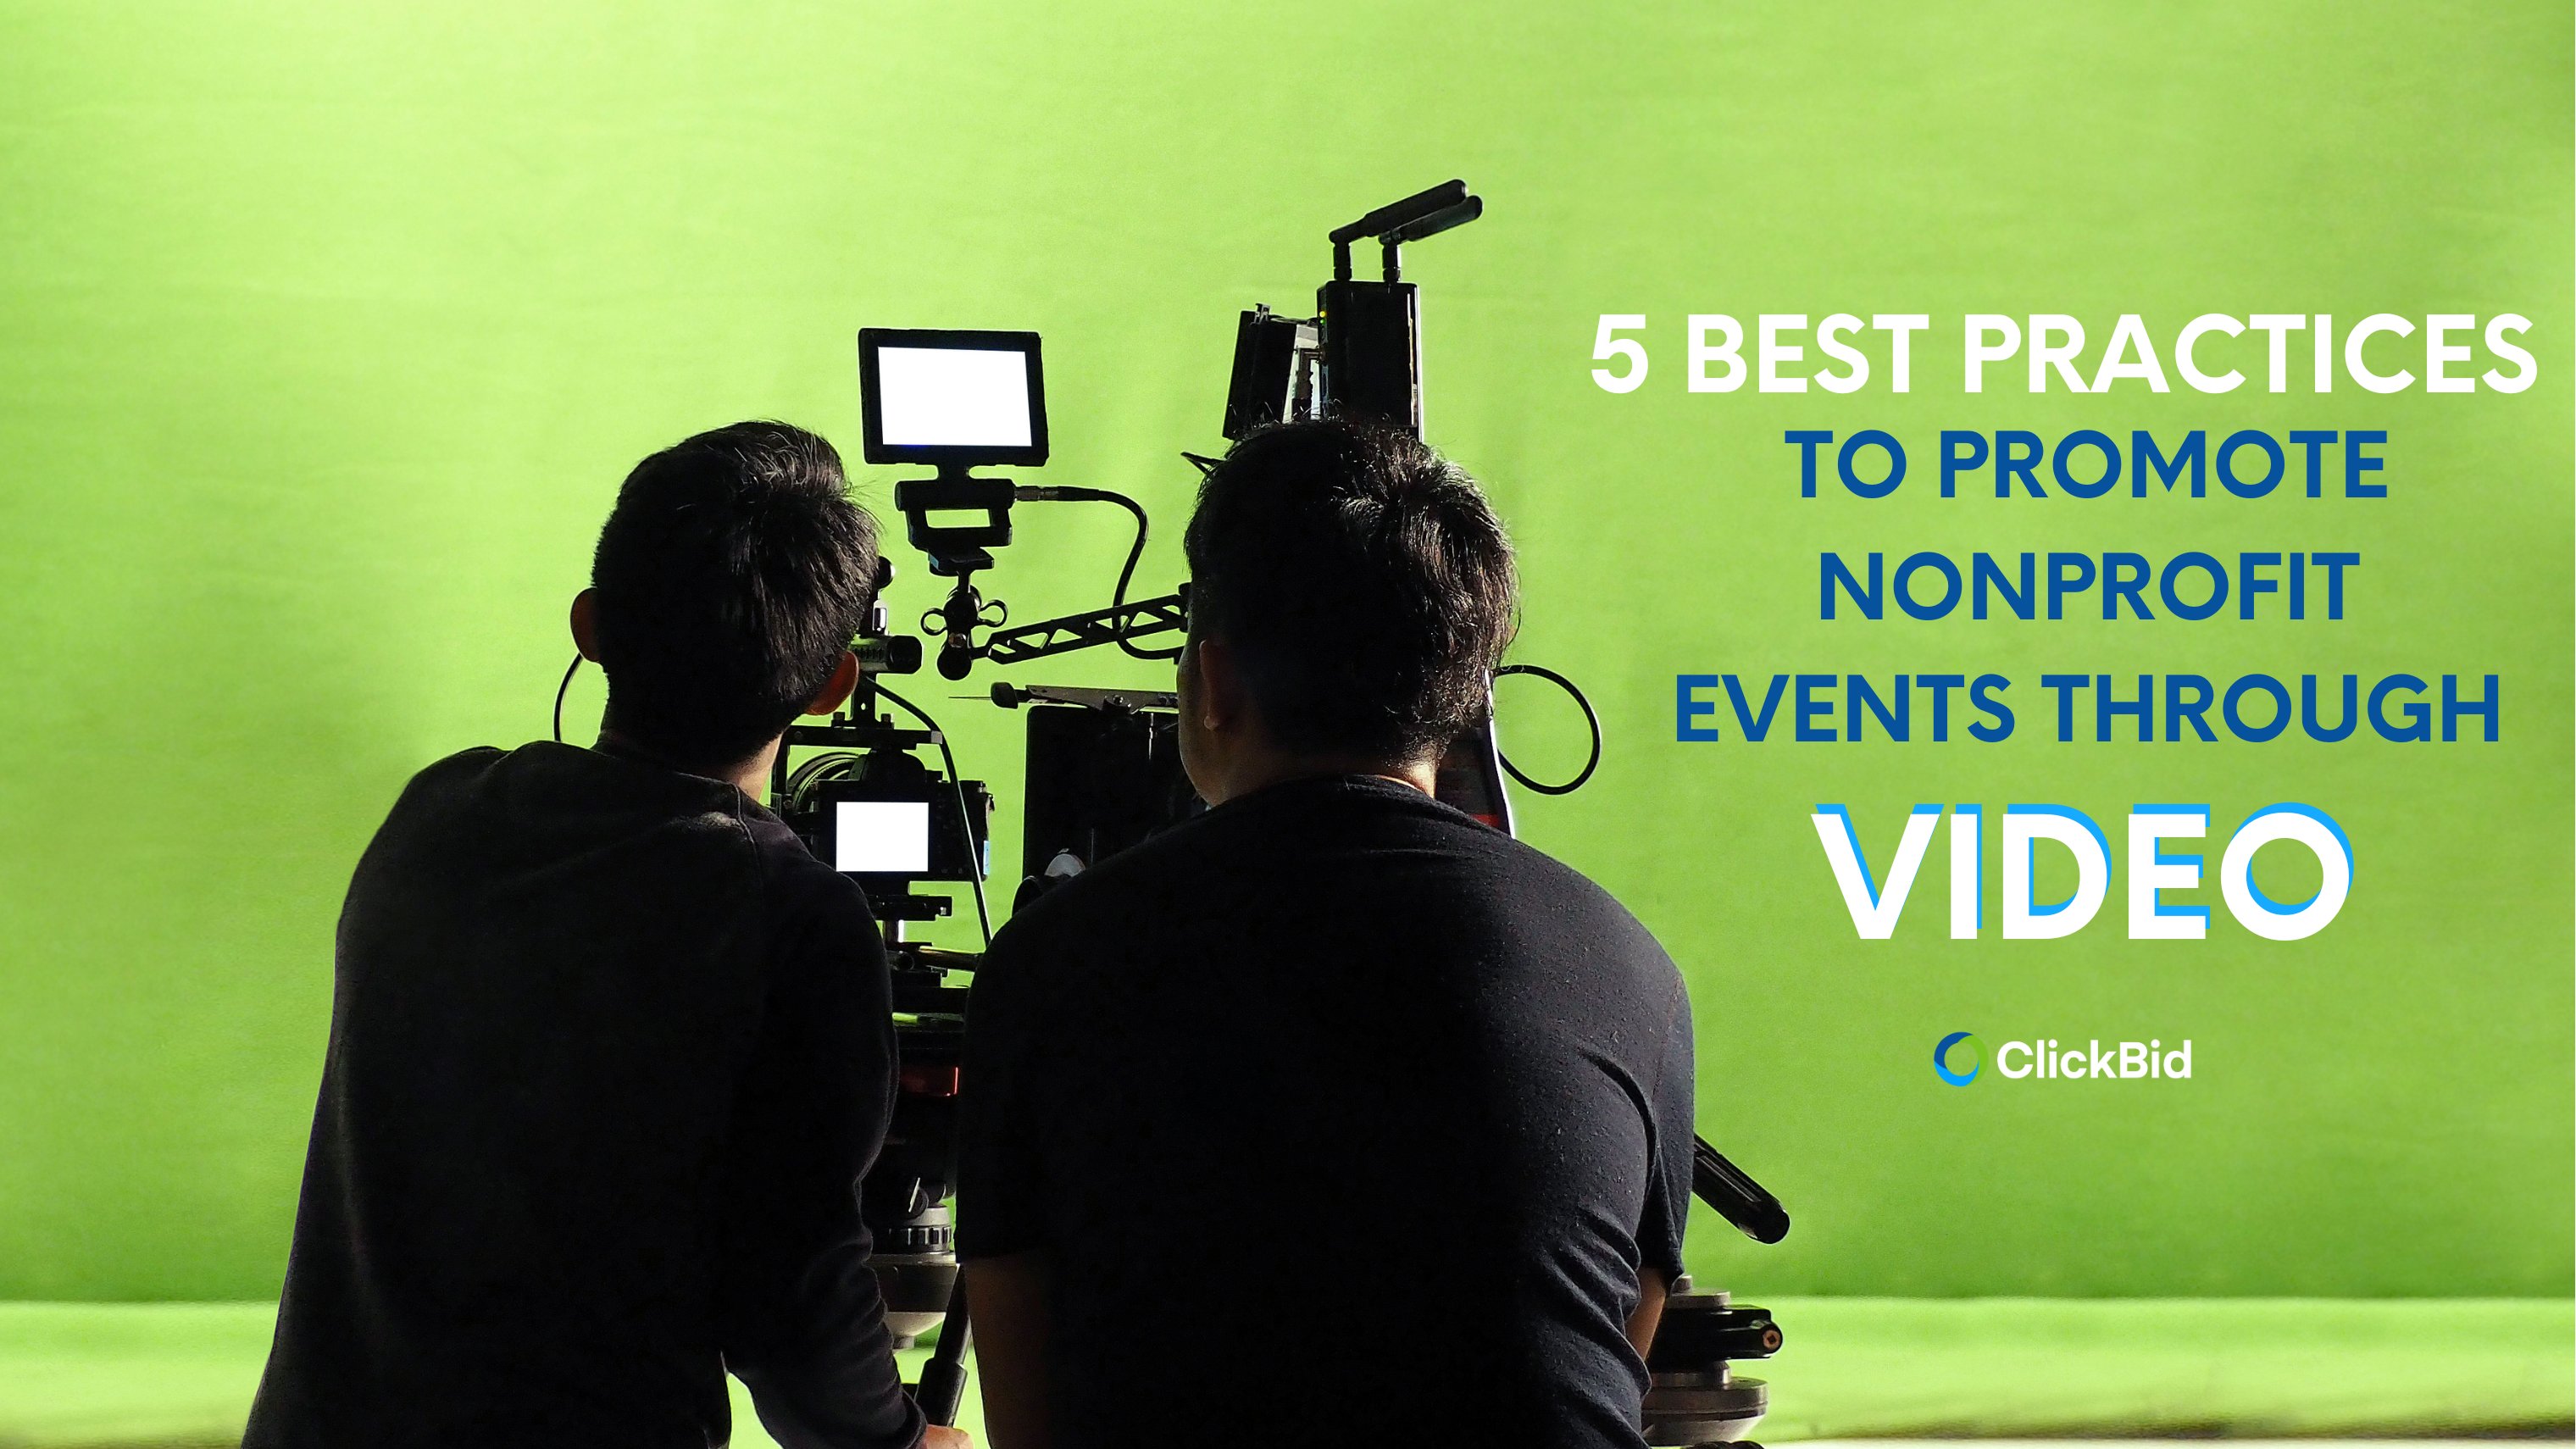 5 Best Practices to Promote Nonprofit Events Through Video